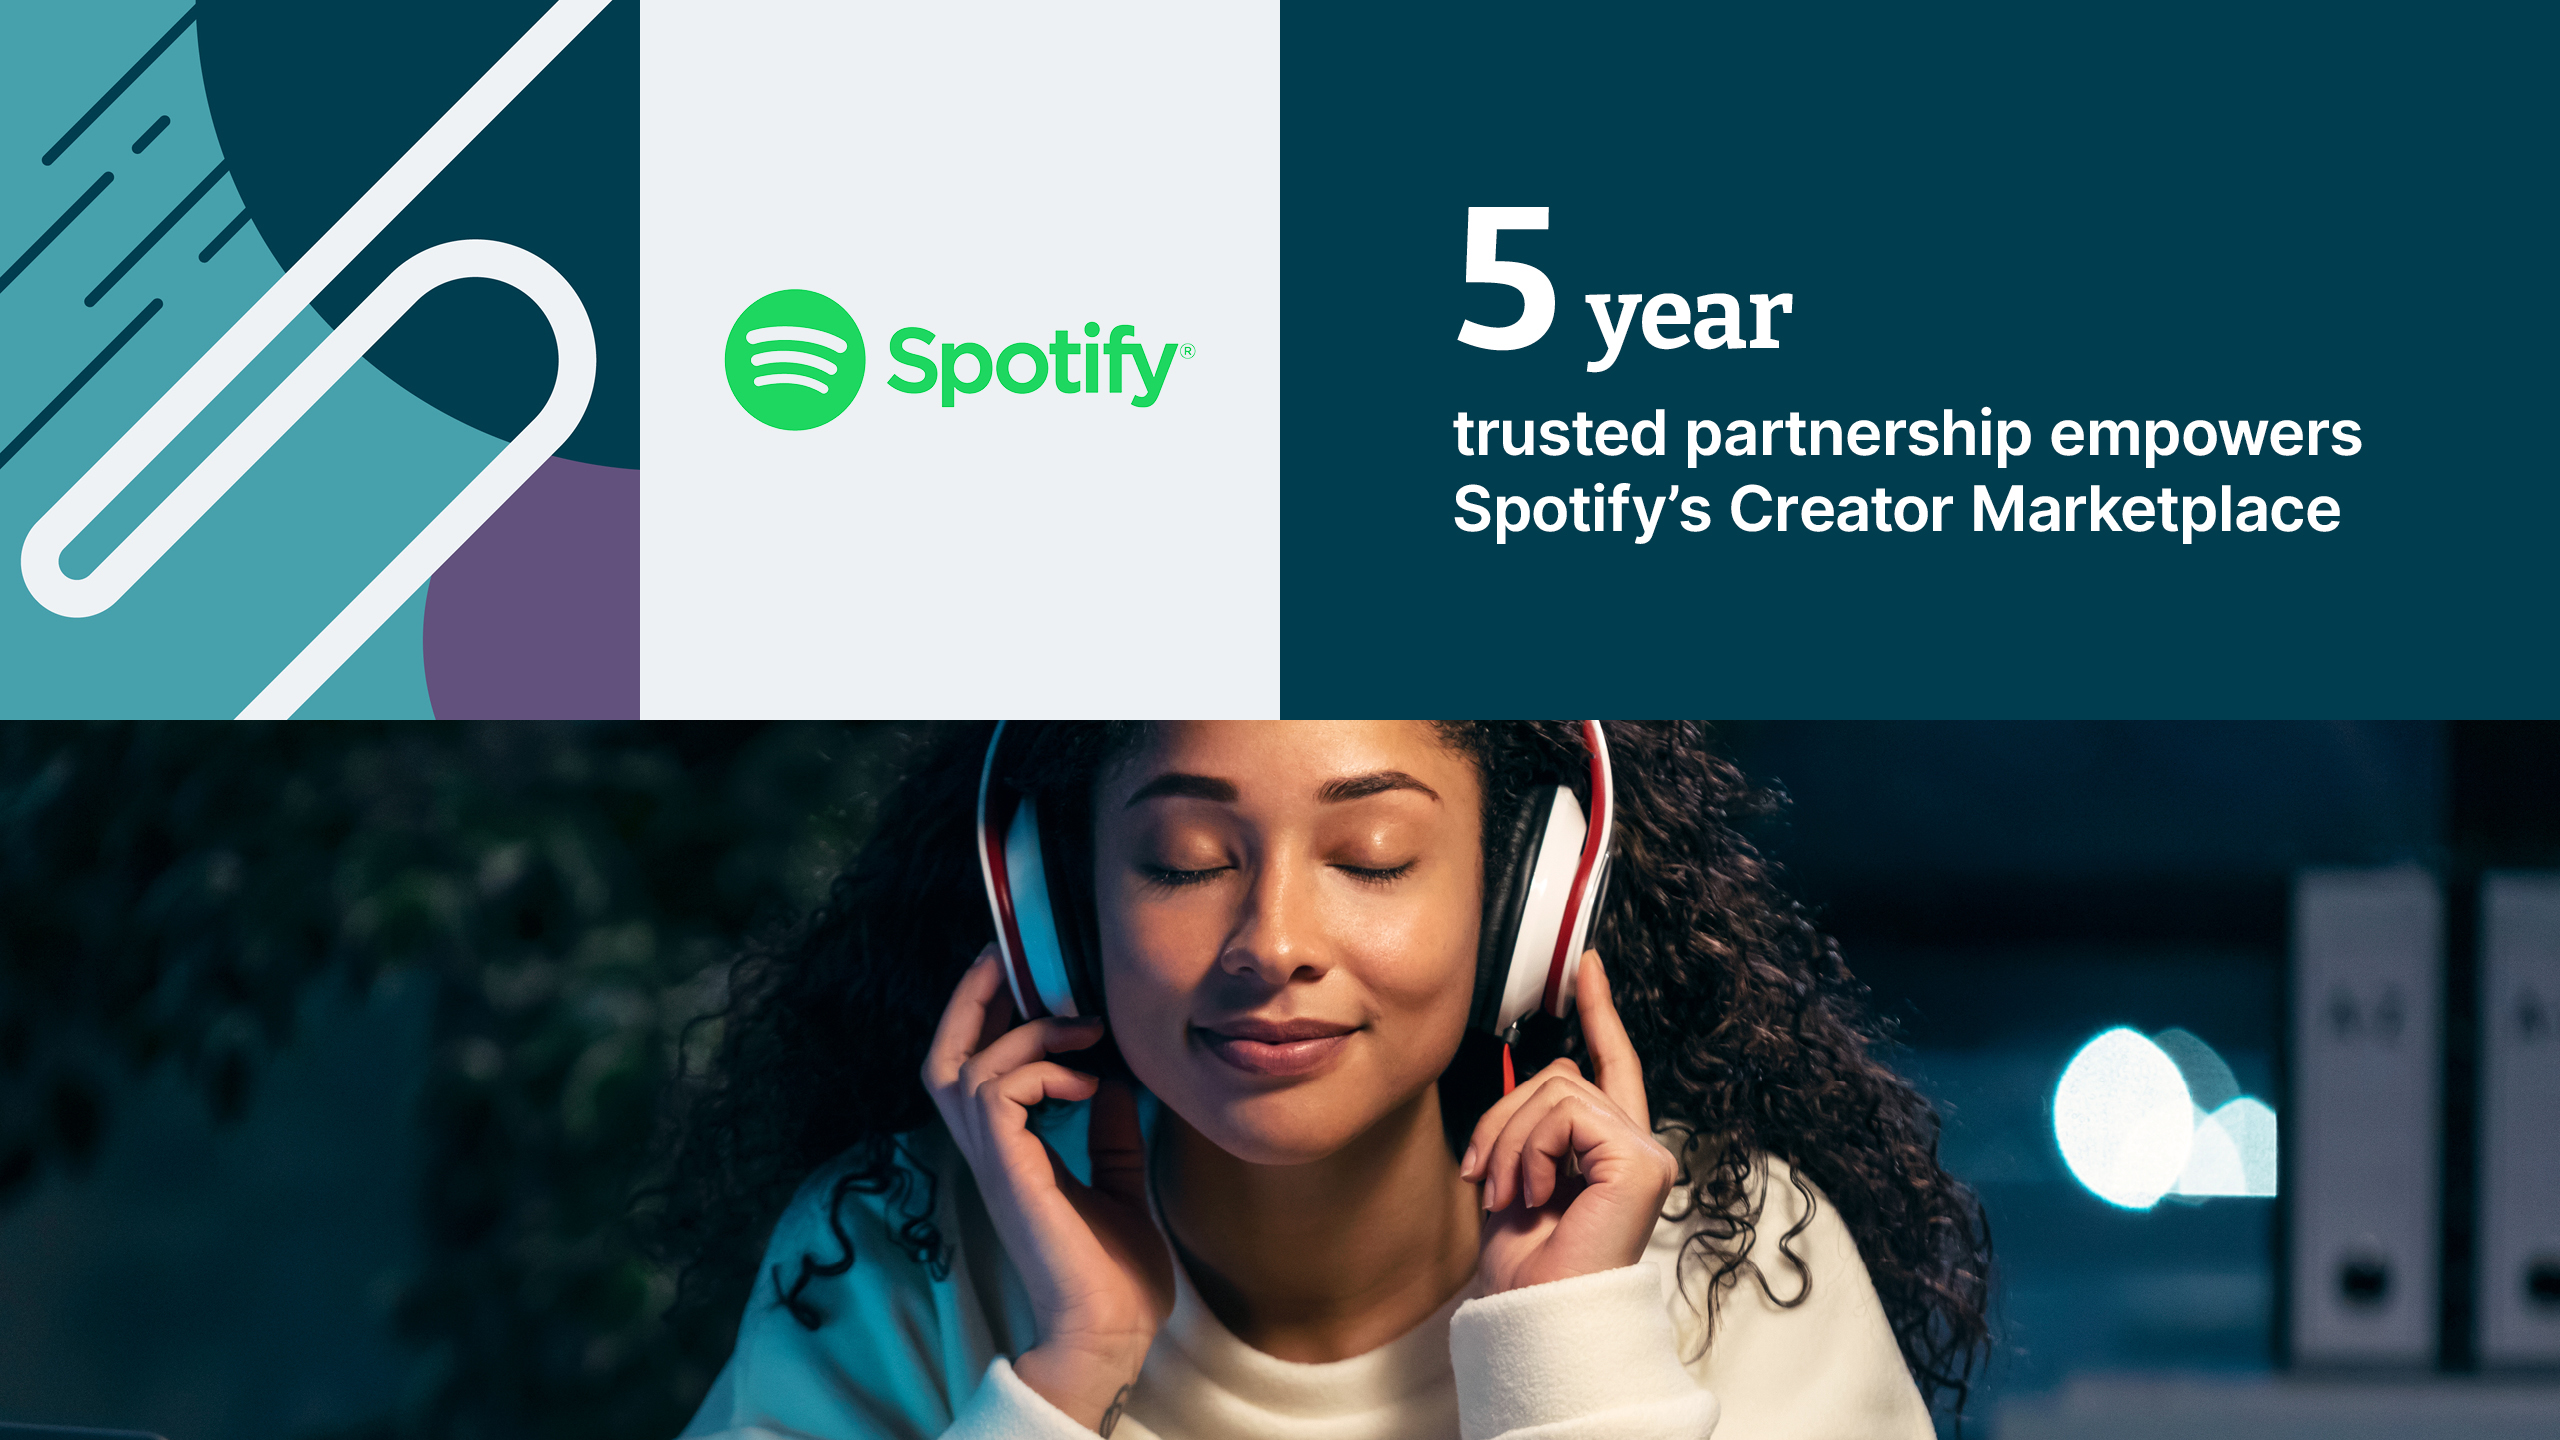 Spotify: 5 year trusted partnership empowers Spotifys creator marketplace